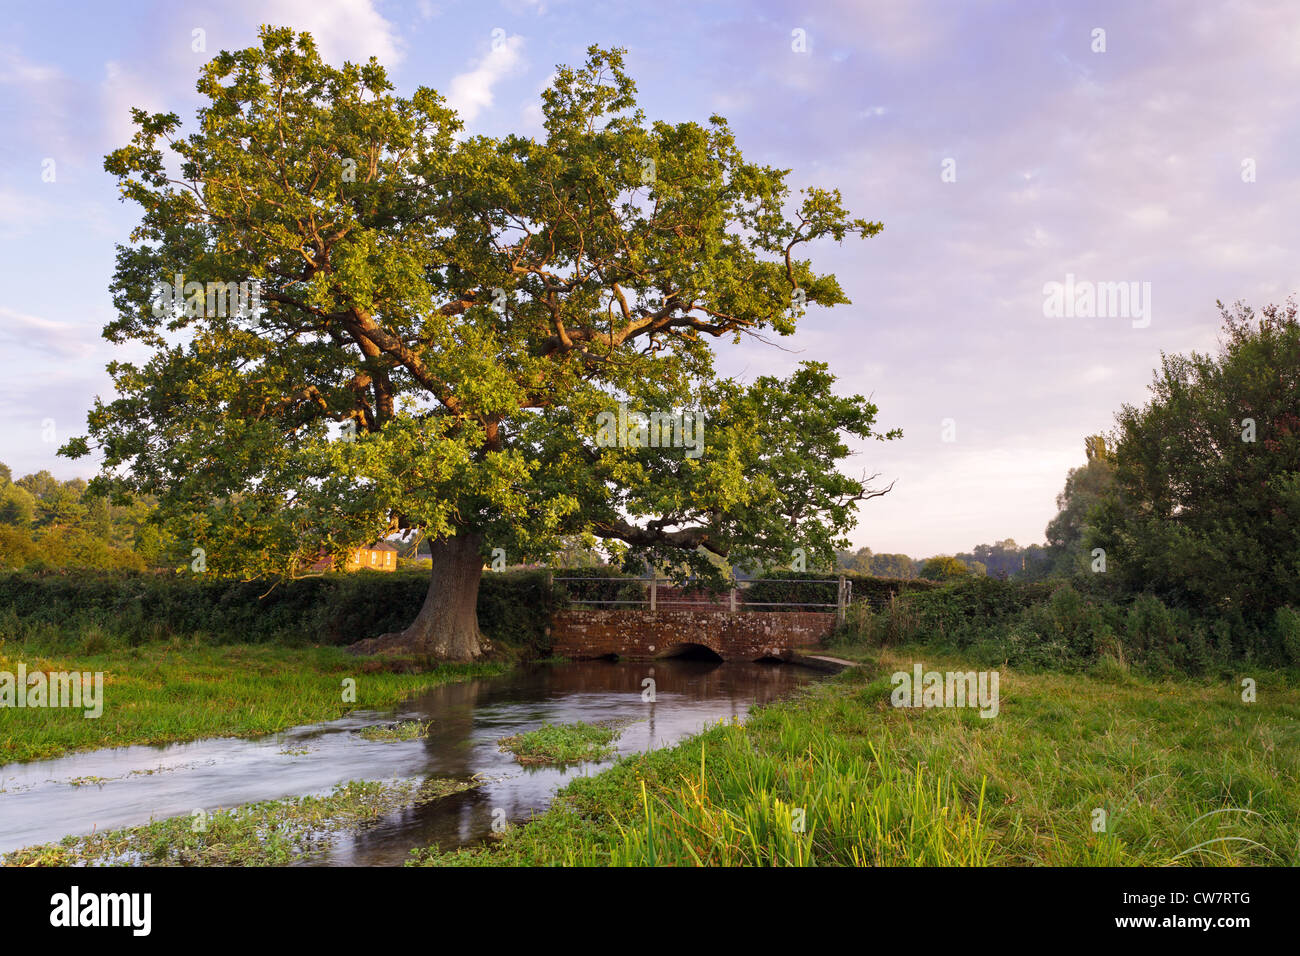 An old oak tree besides a bridge on a tributary stream for the river Arle in Hampshire, taken at sunrise. Stock Photo